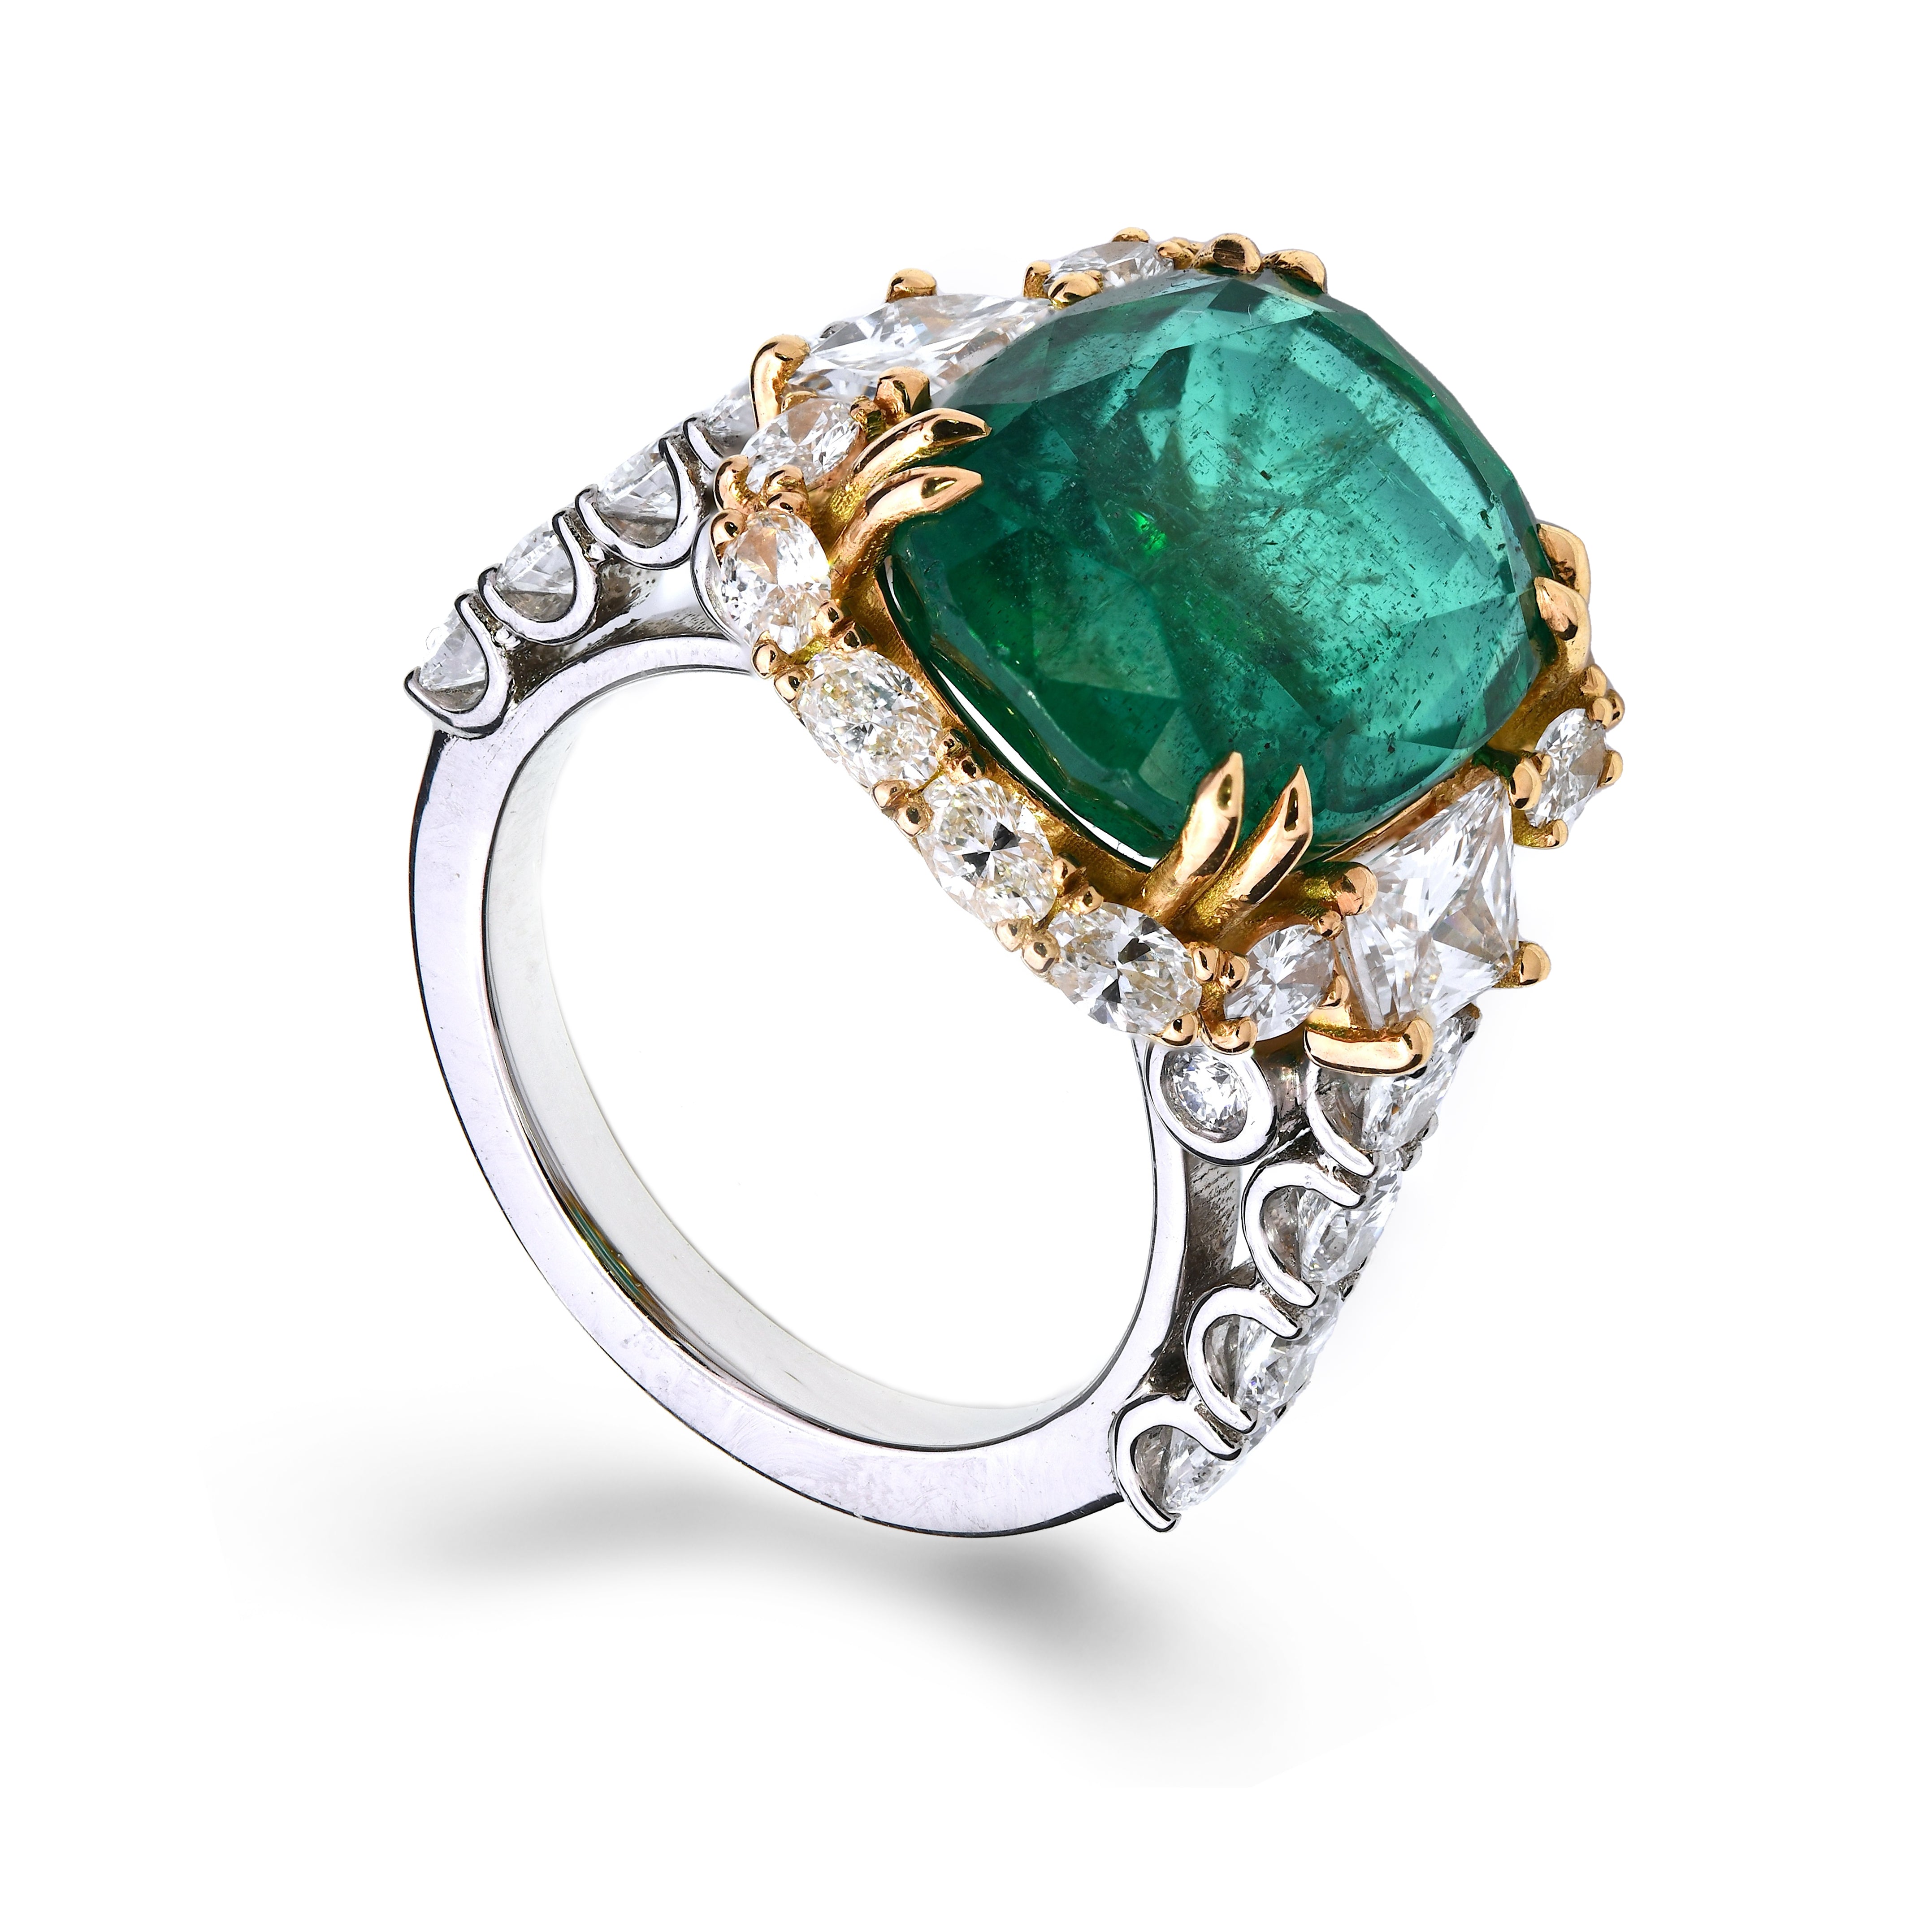 Custer Unique Ring with Natural Zambian Green Emerald 11.28 ct in Platinum 950